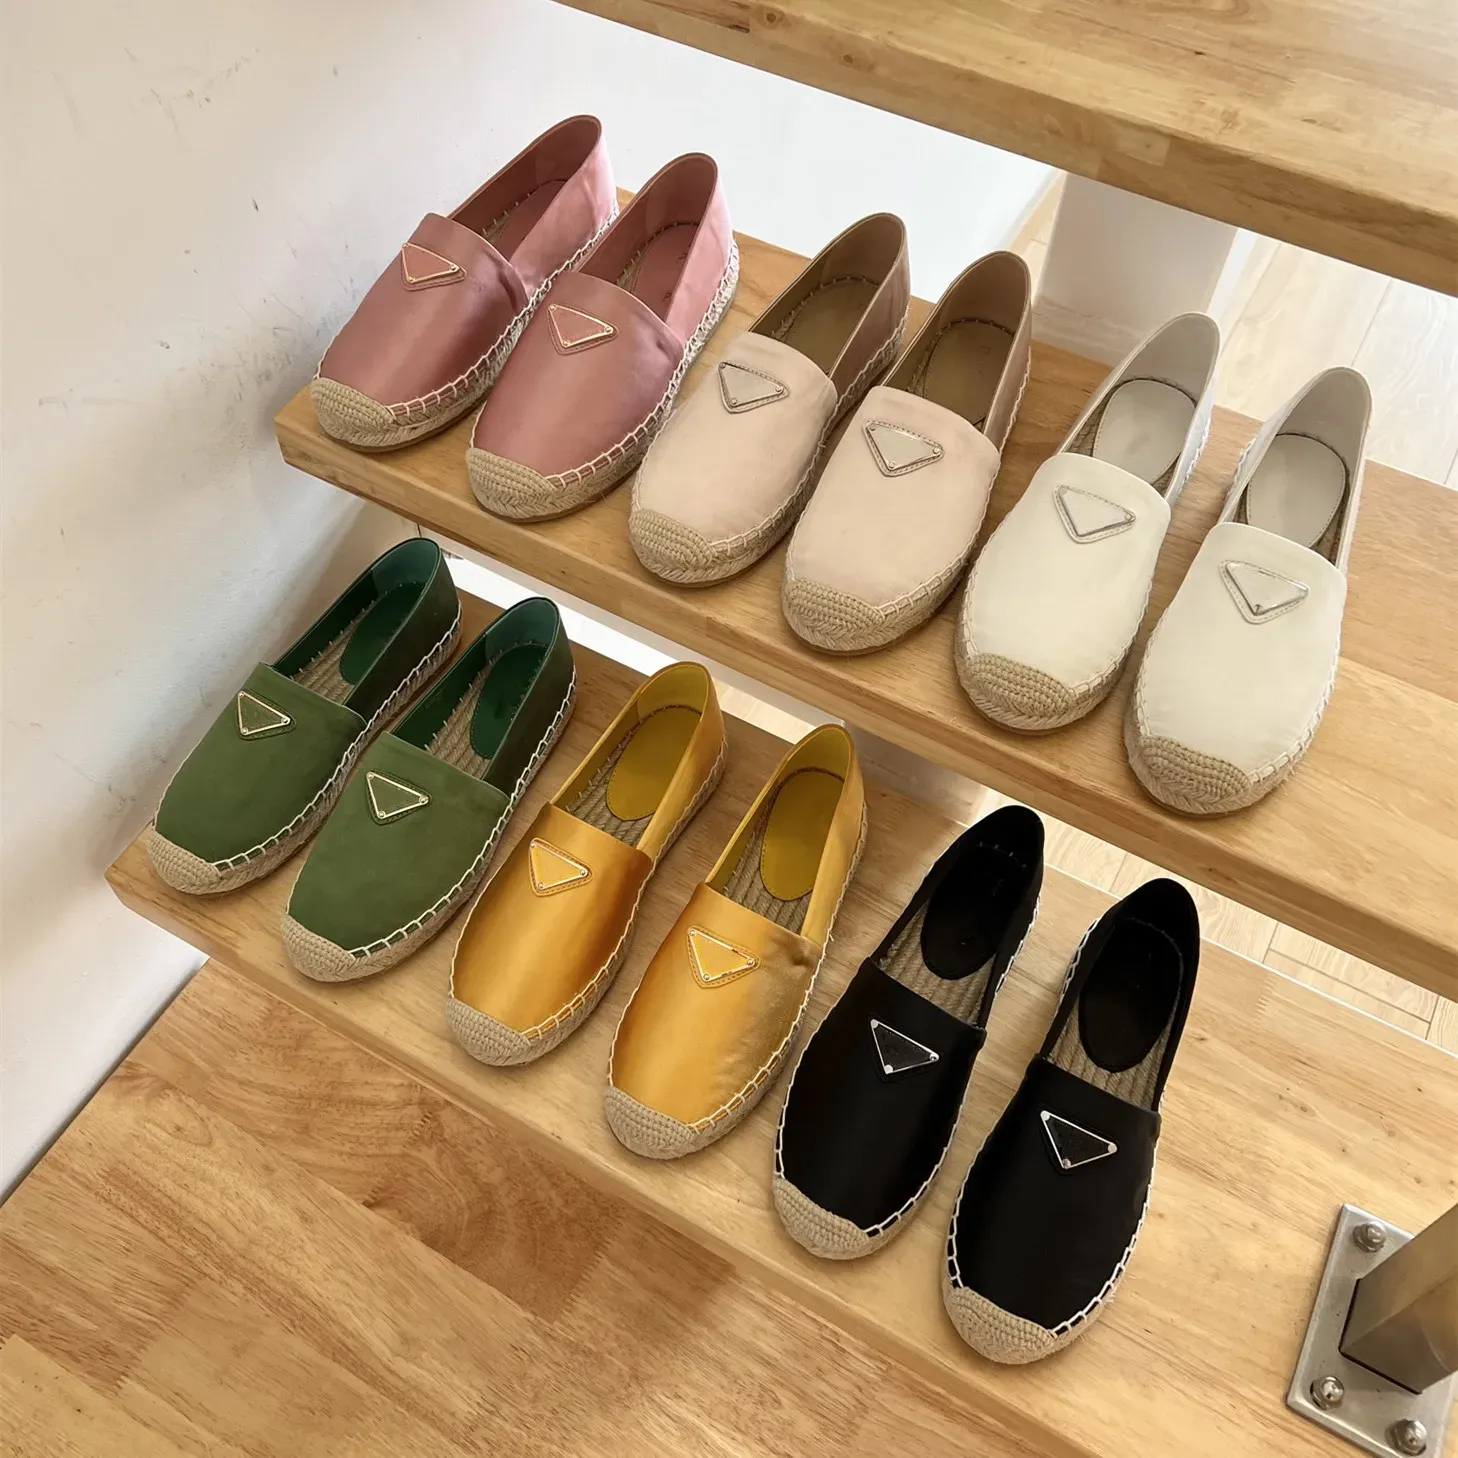 Triangle buckle Fisherman canvas Shoes summer Casual Shoes raffia straw Espadrilles Designers ladies Women flat Beach Half Slippers woman Loafers slipper Mules